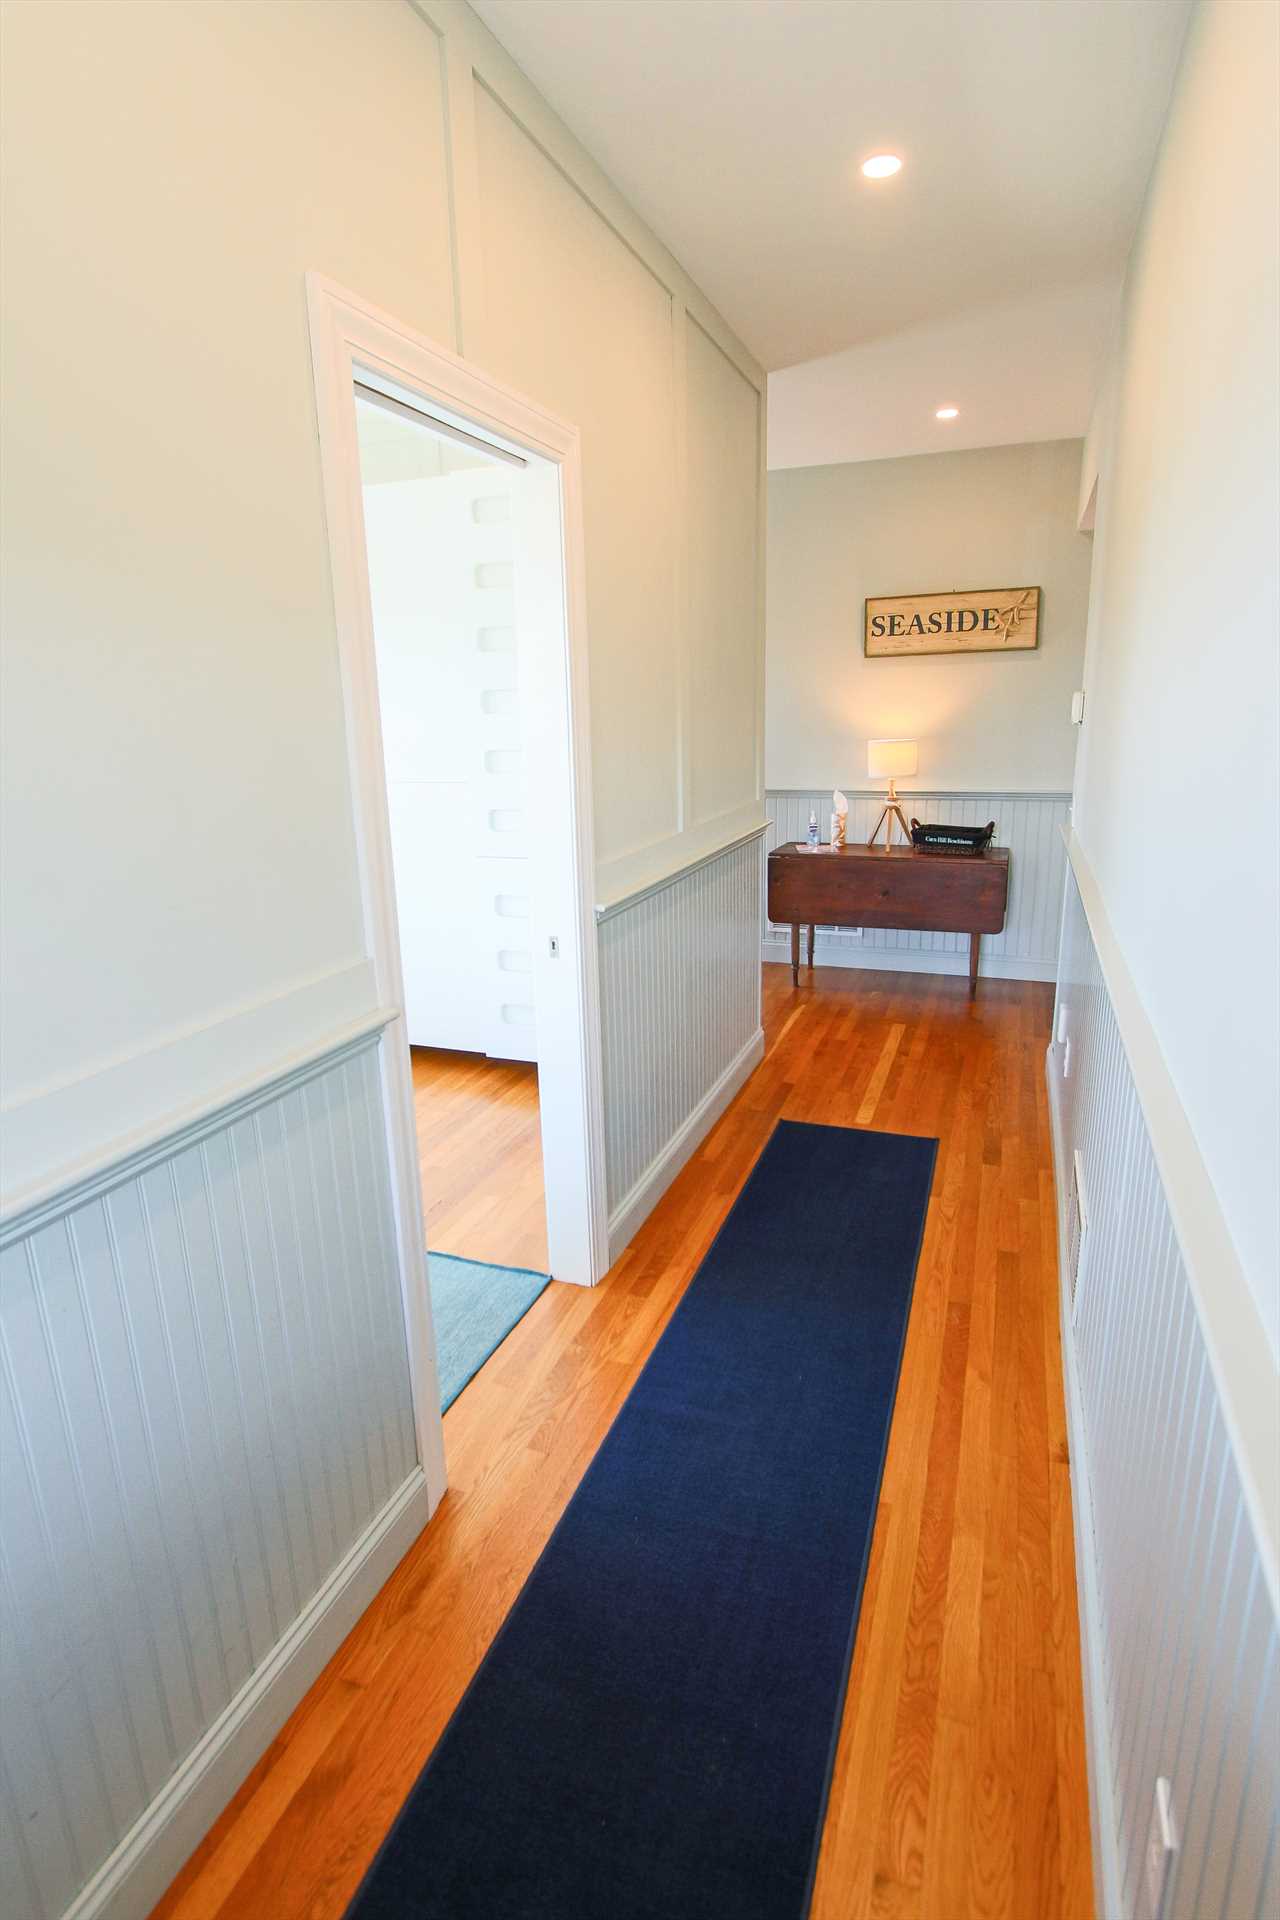 Entry way with 2nd Bedroom on the Right